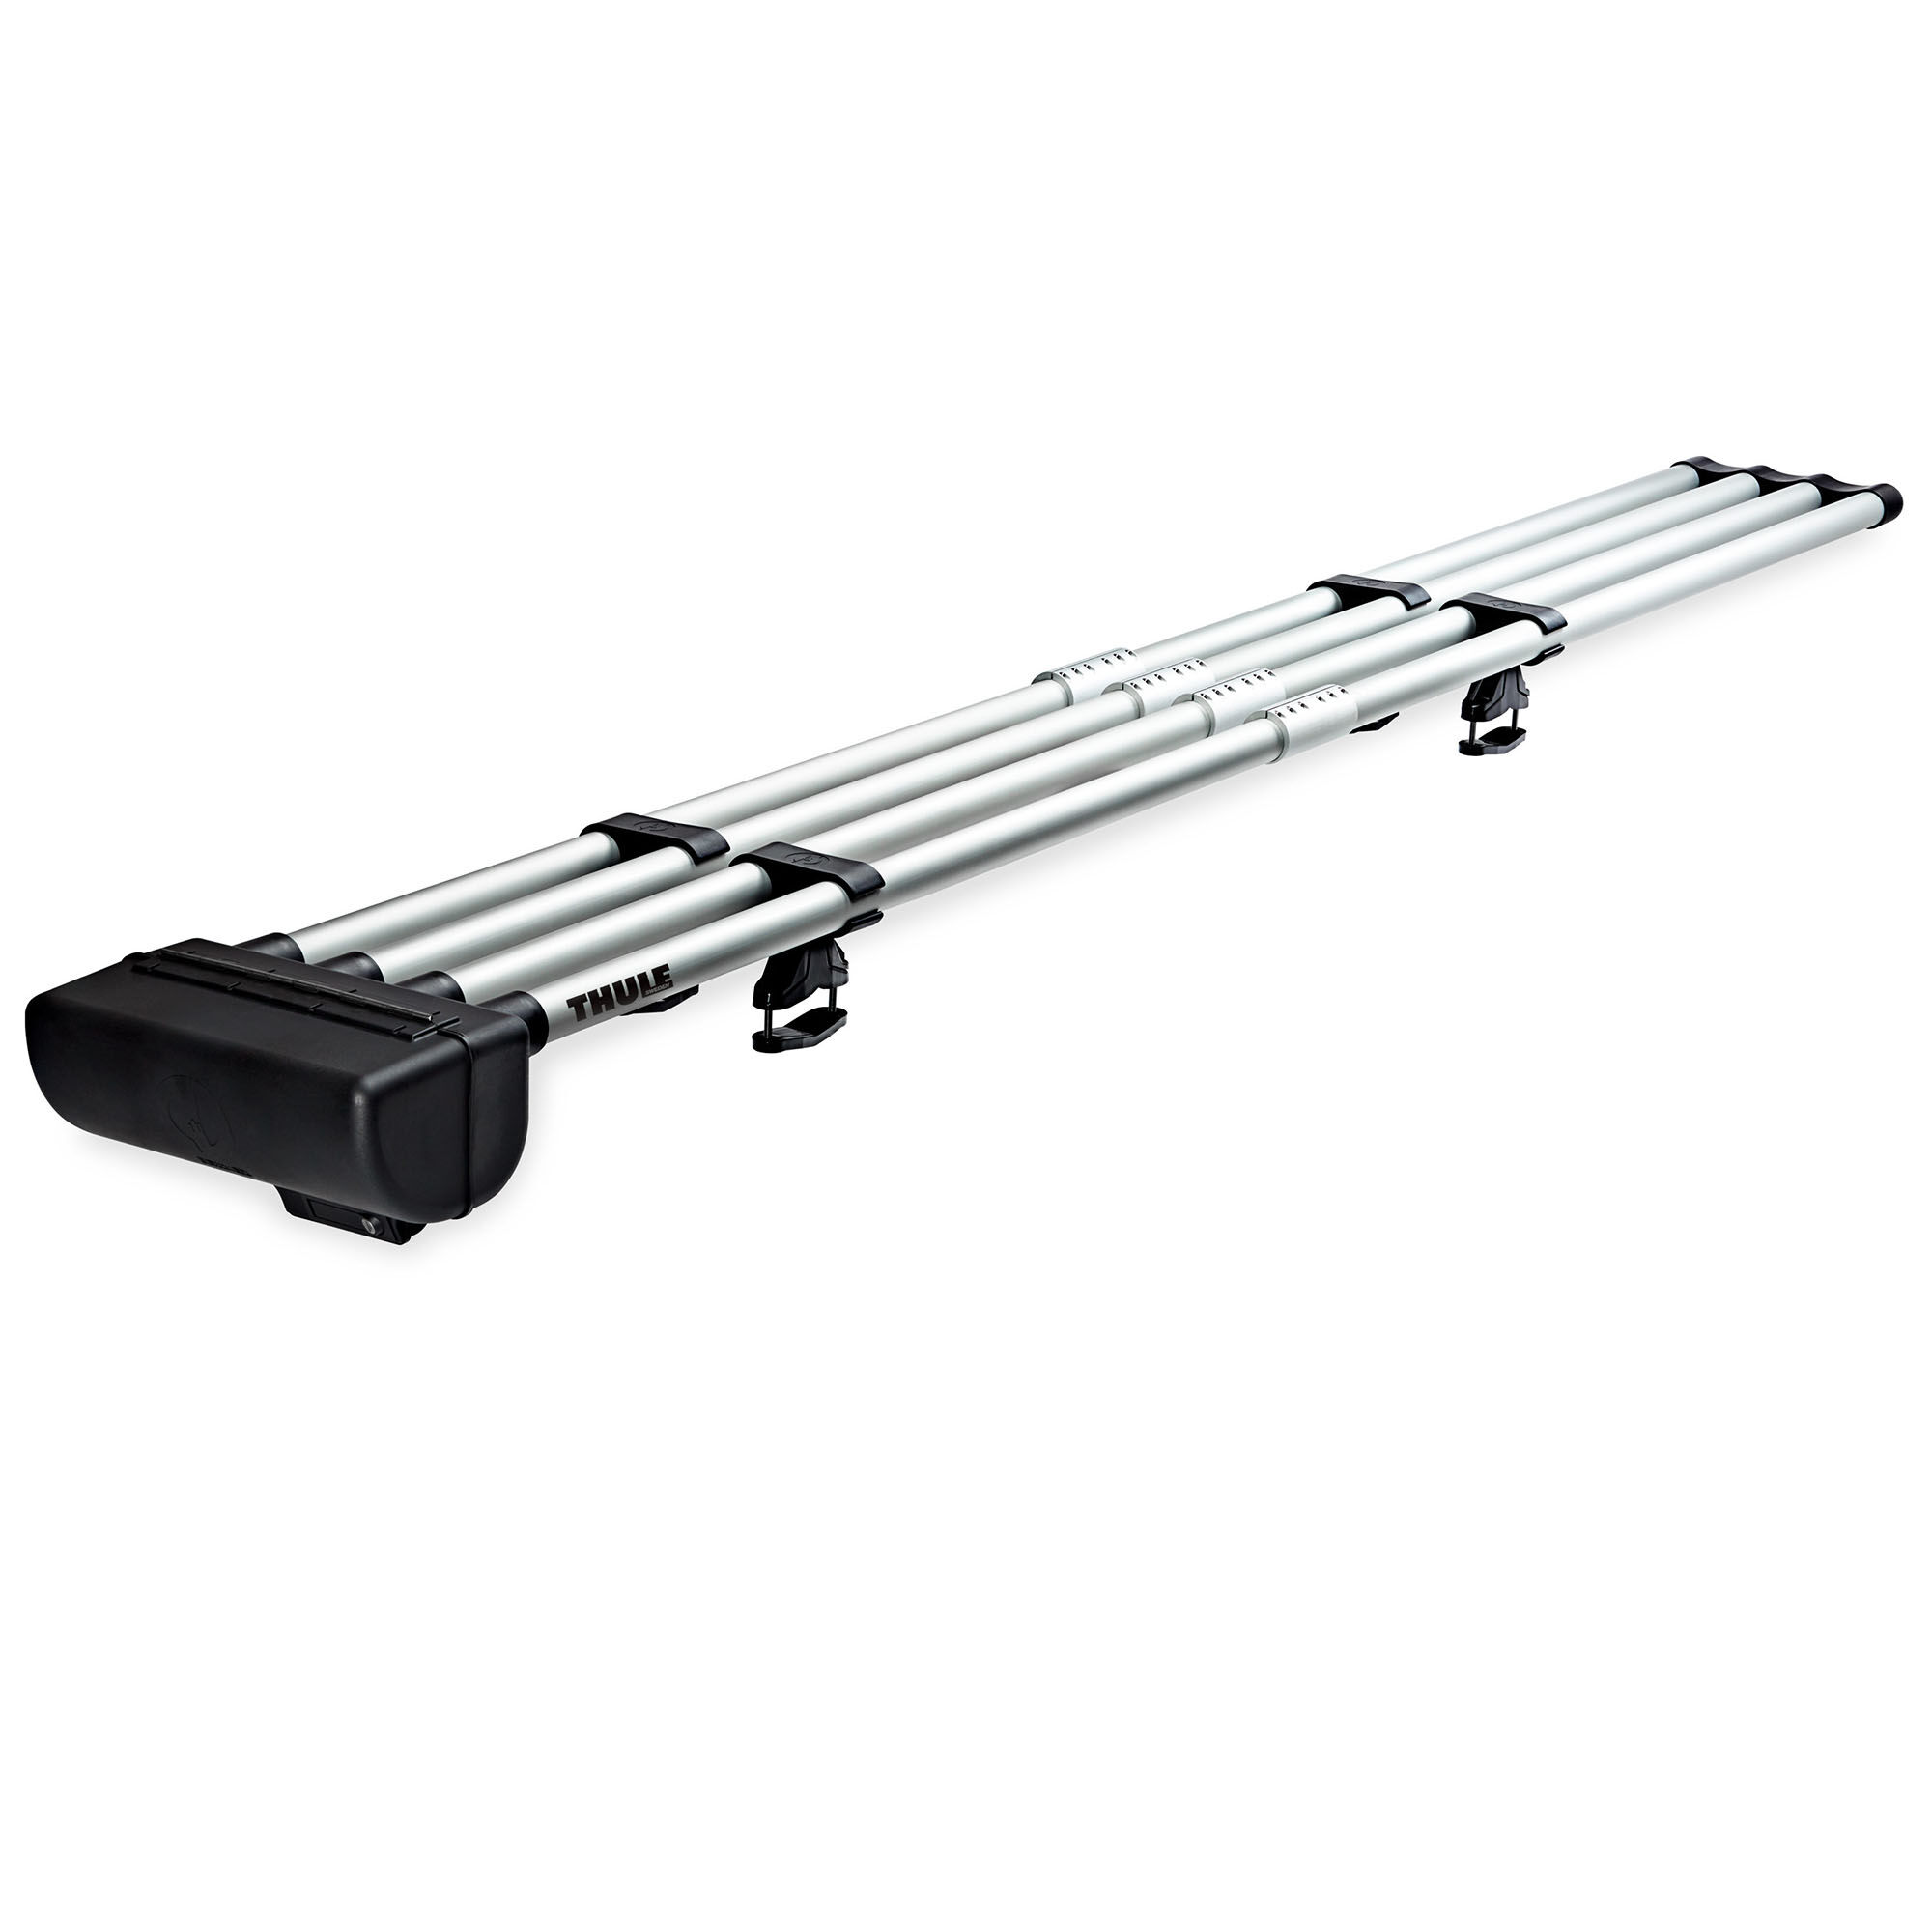 Thule RodVault 4 Fishing Rod Rack  - No Color - Size: No Size